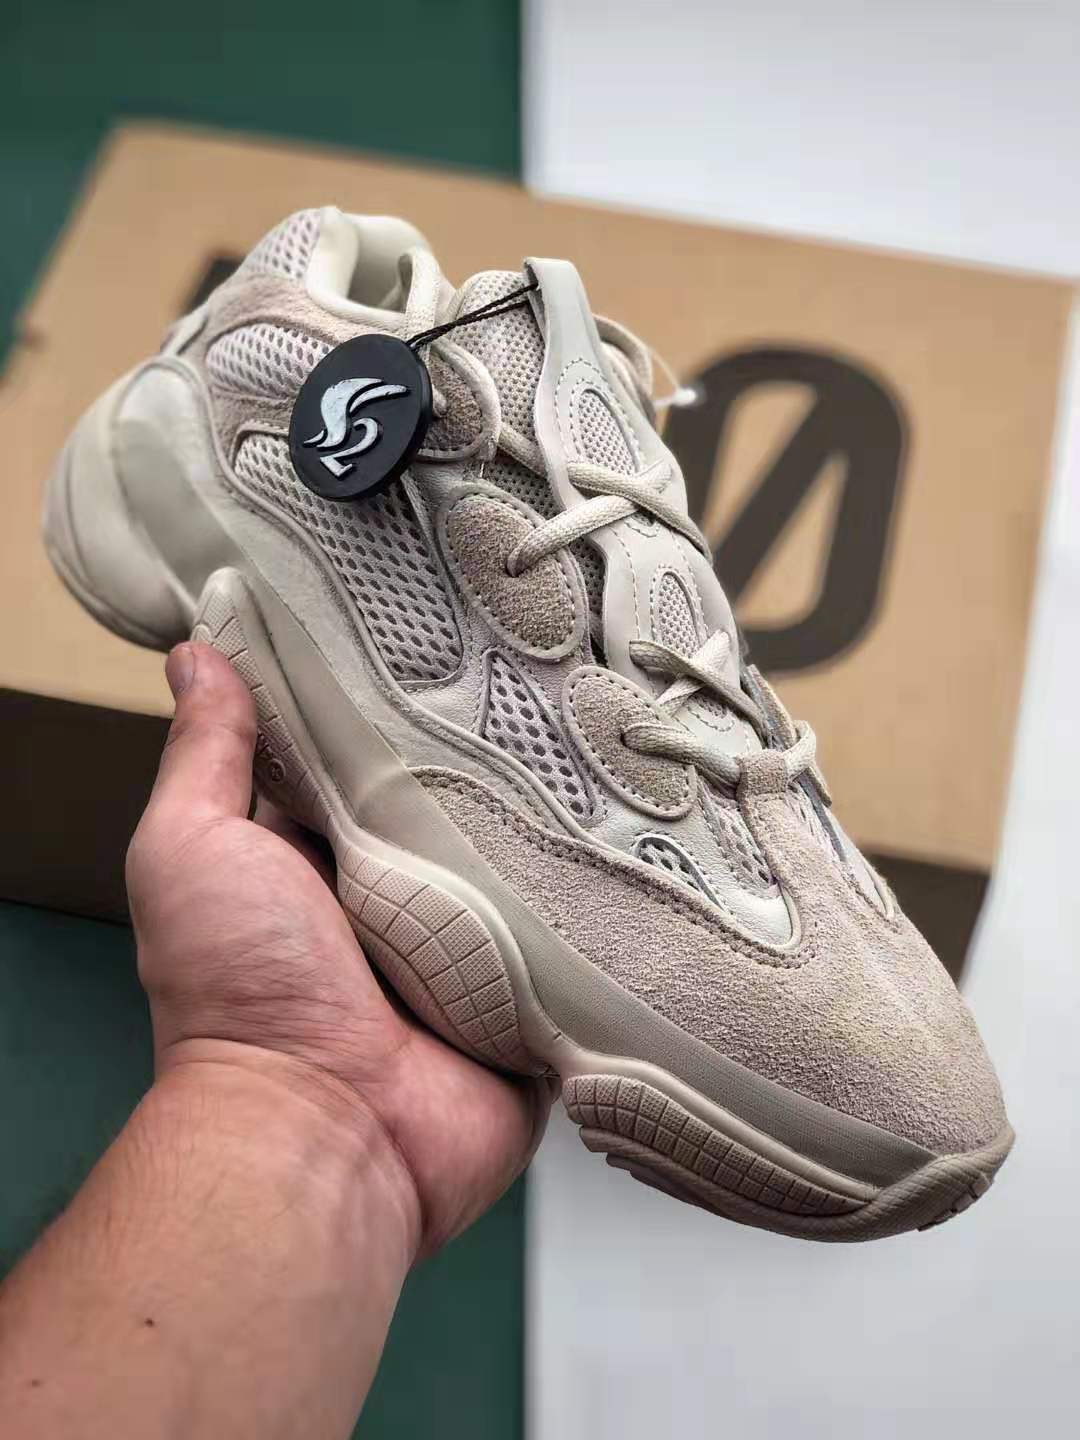 Adidas Yeezy 500 Ash Grey GX3607 - Ultimate Sneaker for Style and Comfort!